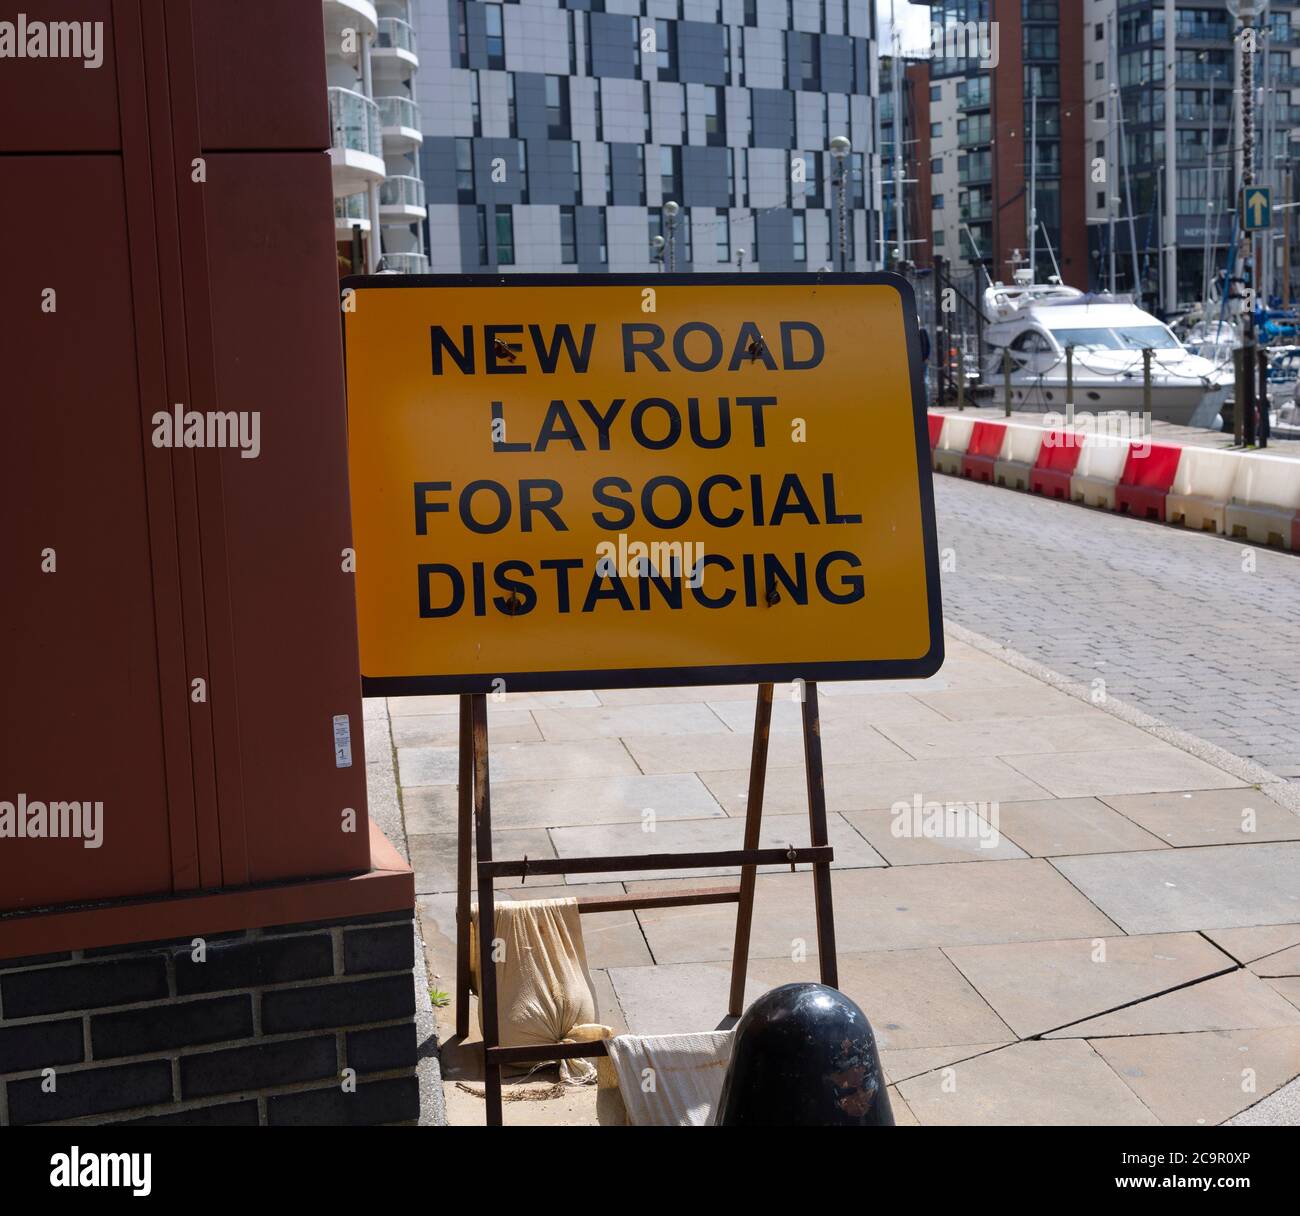 Sign for new road layout for social distancing, Wet Dock waterfront, Ipswich, Suffolk, England, UK July 2020 Stock Photo